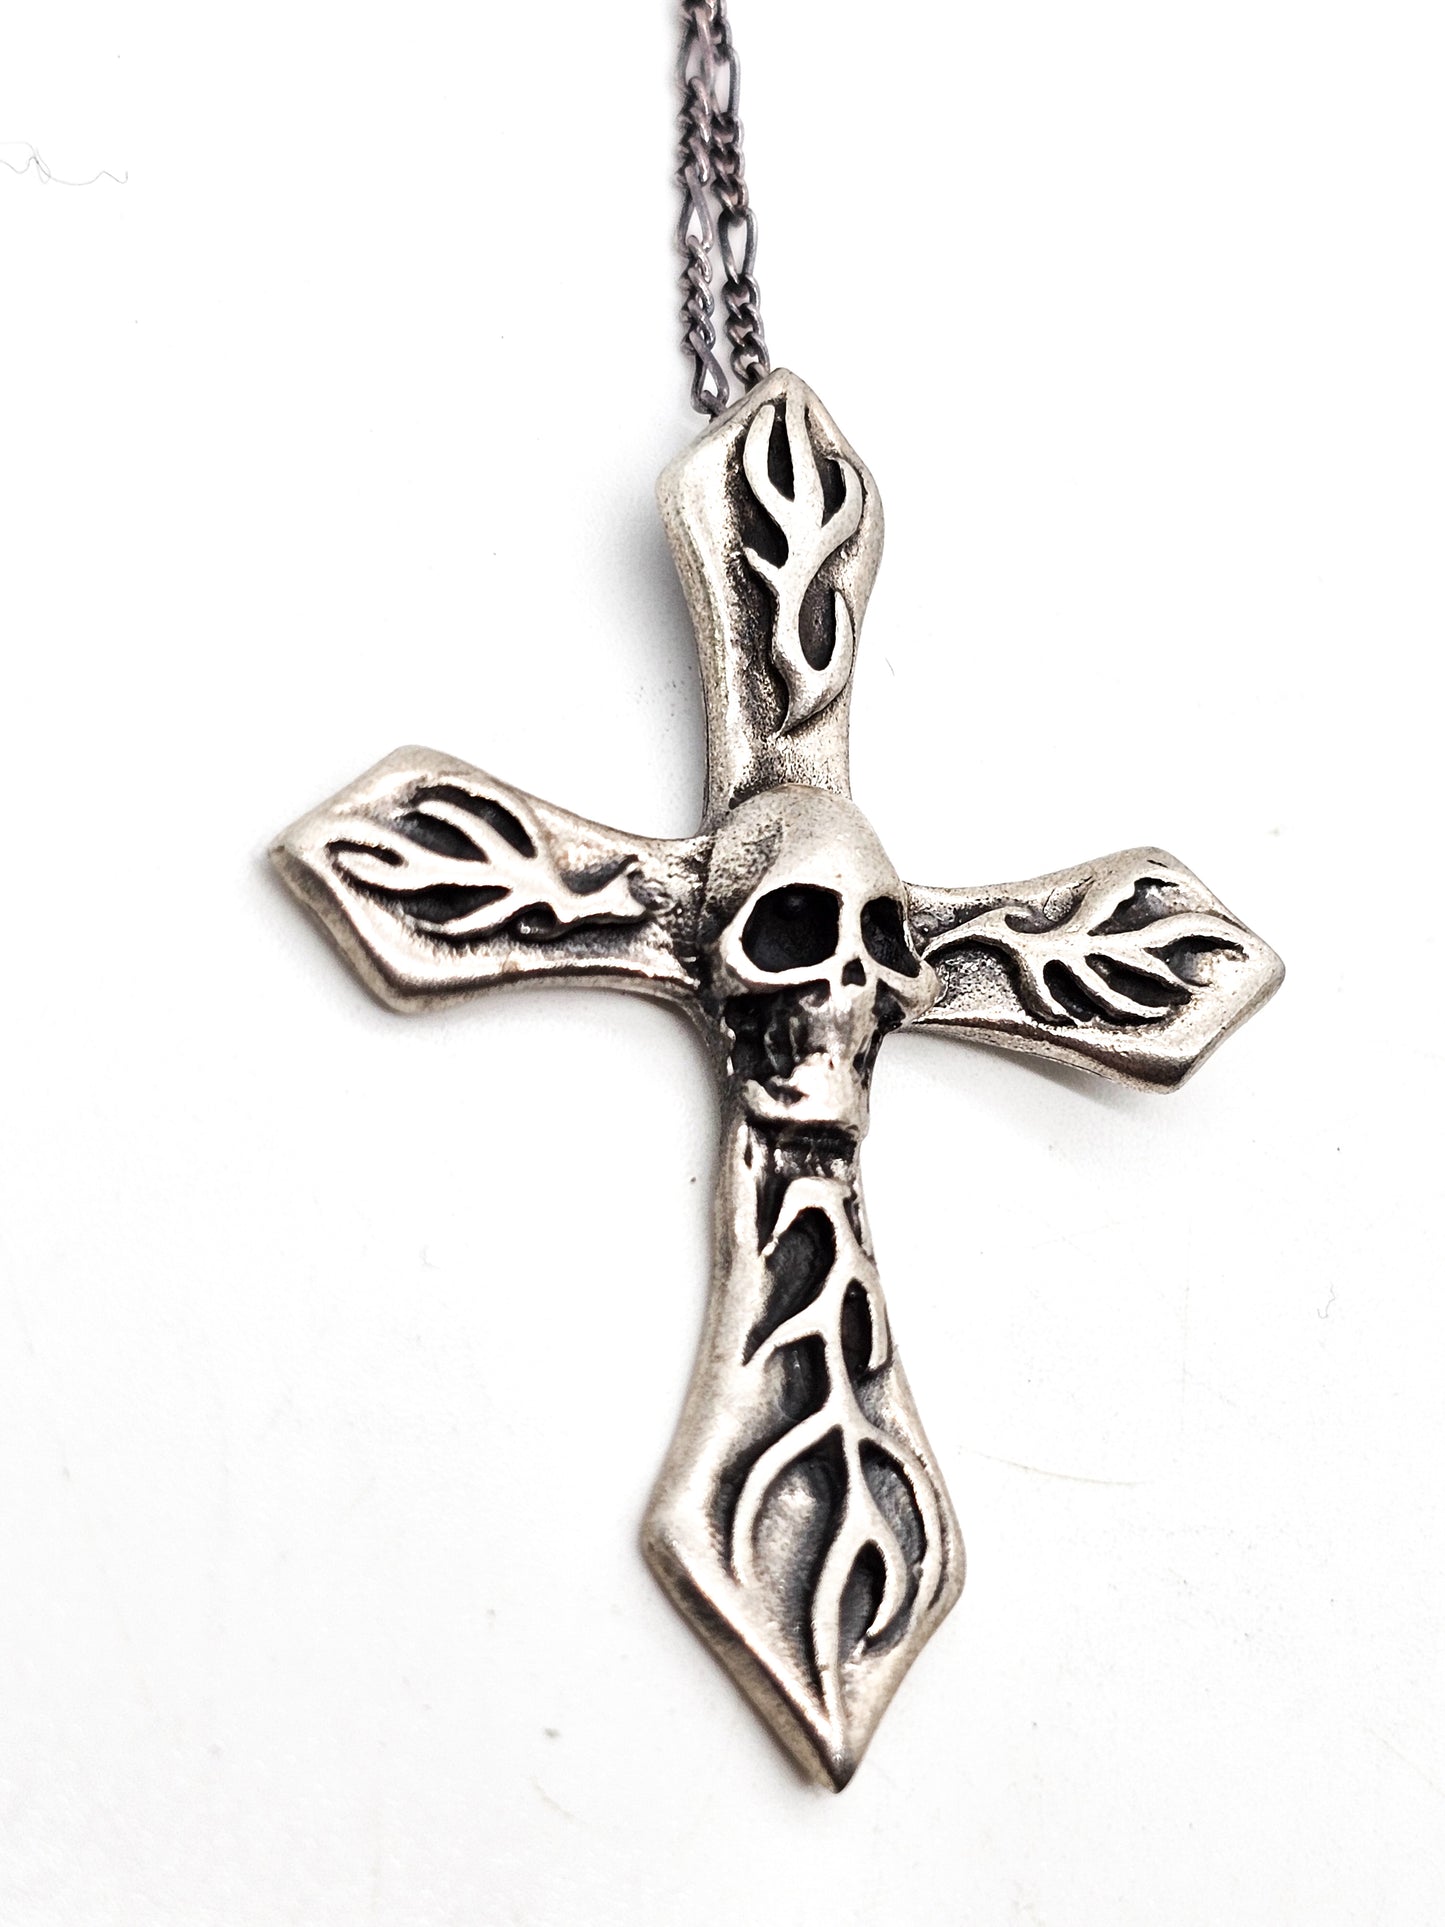 Flaming skull burning cross retro gothic vintage sterling silver pendant necklace